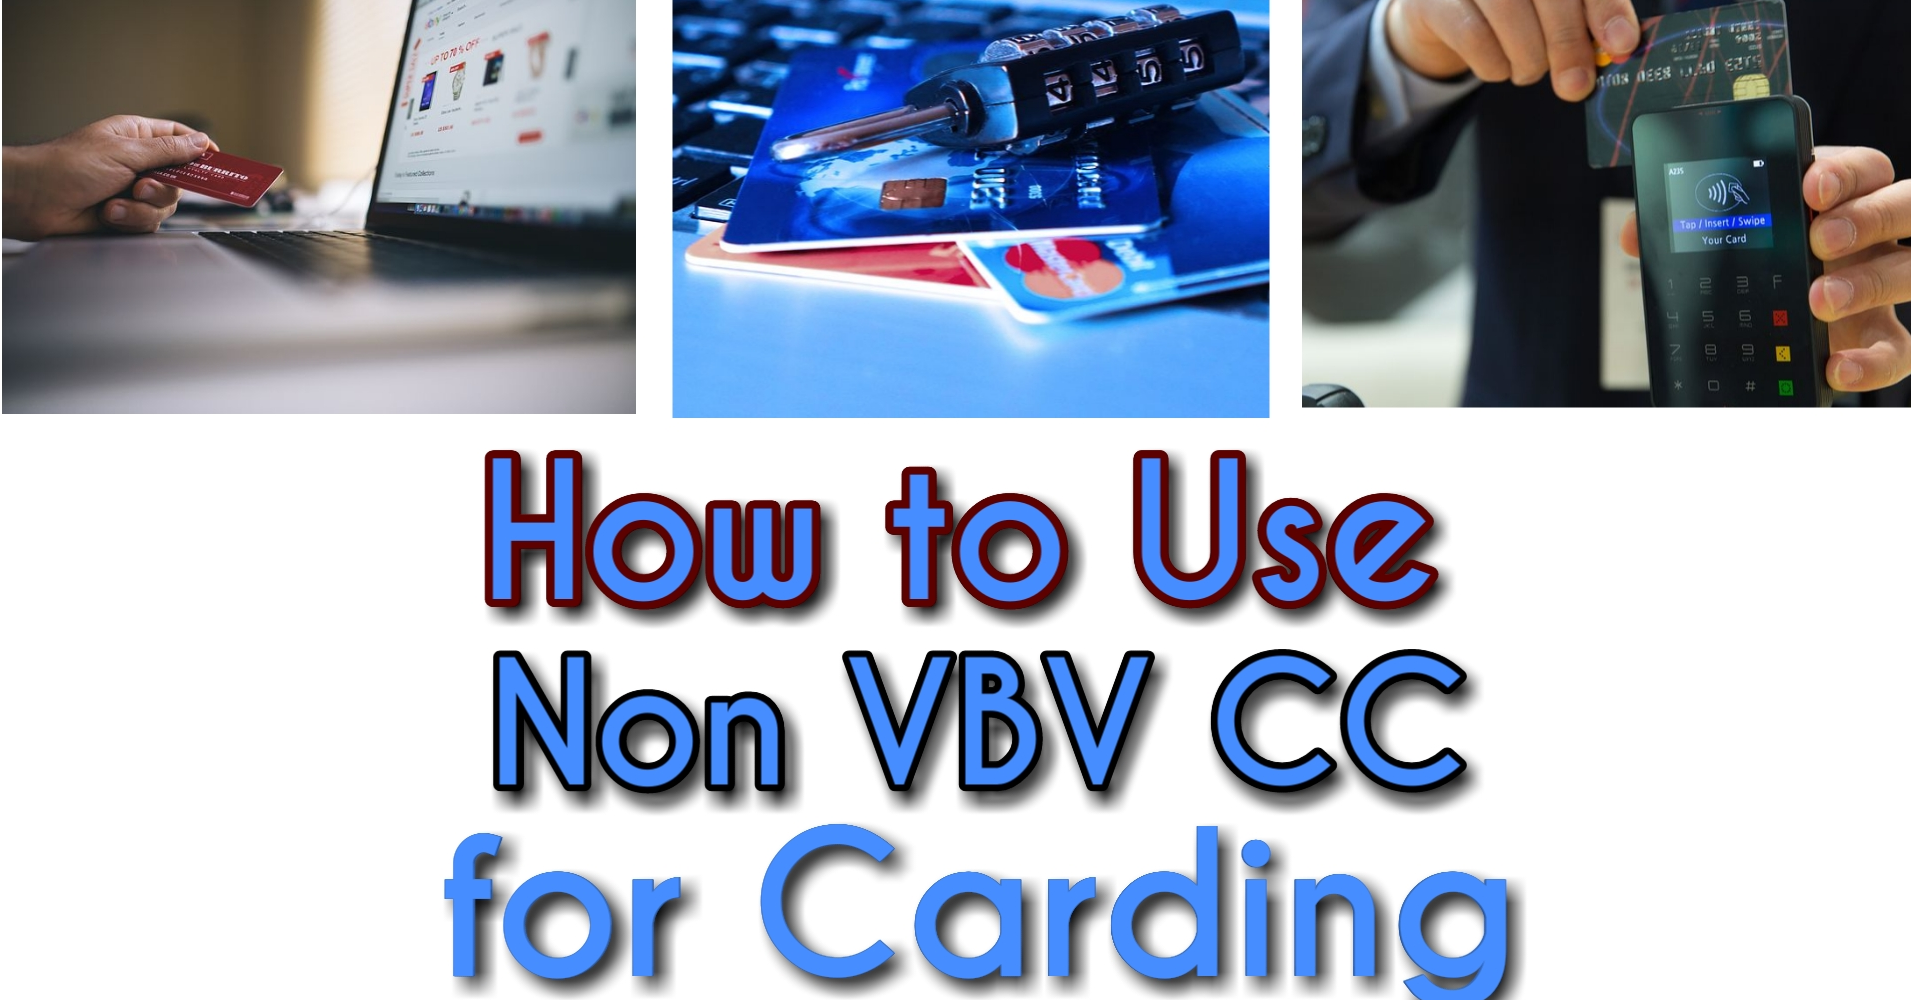 How to use non vbv cc for carding